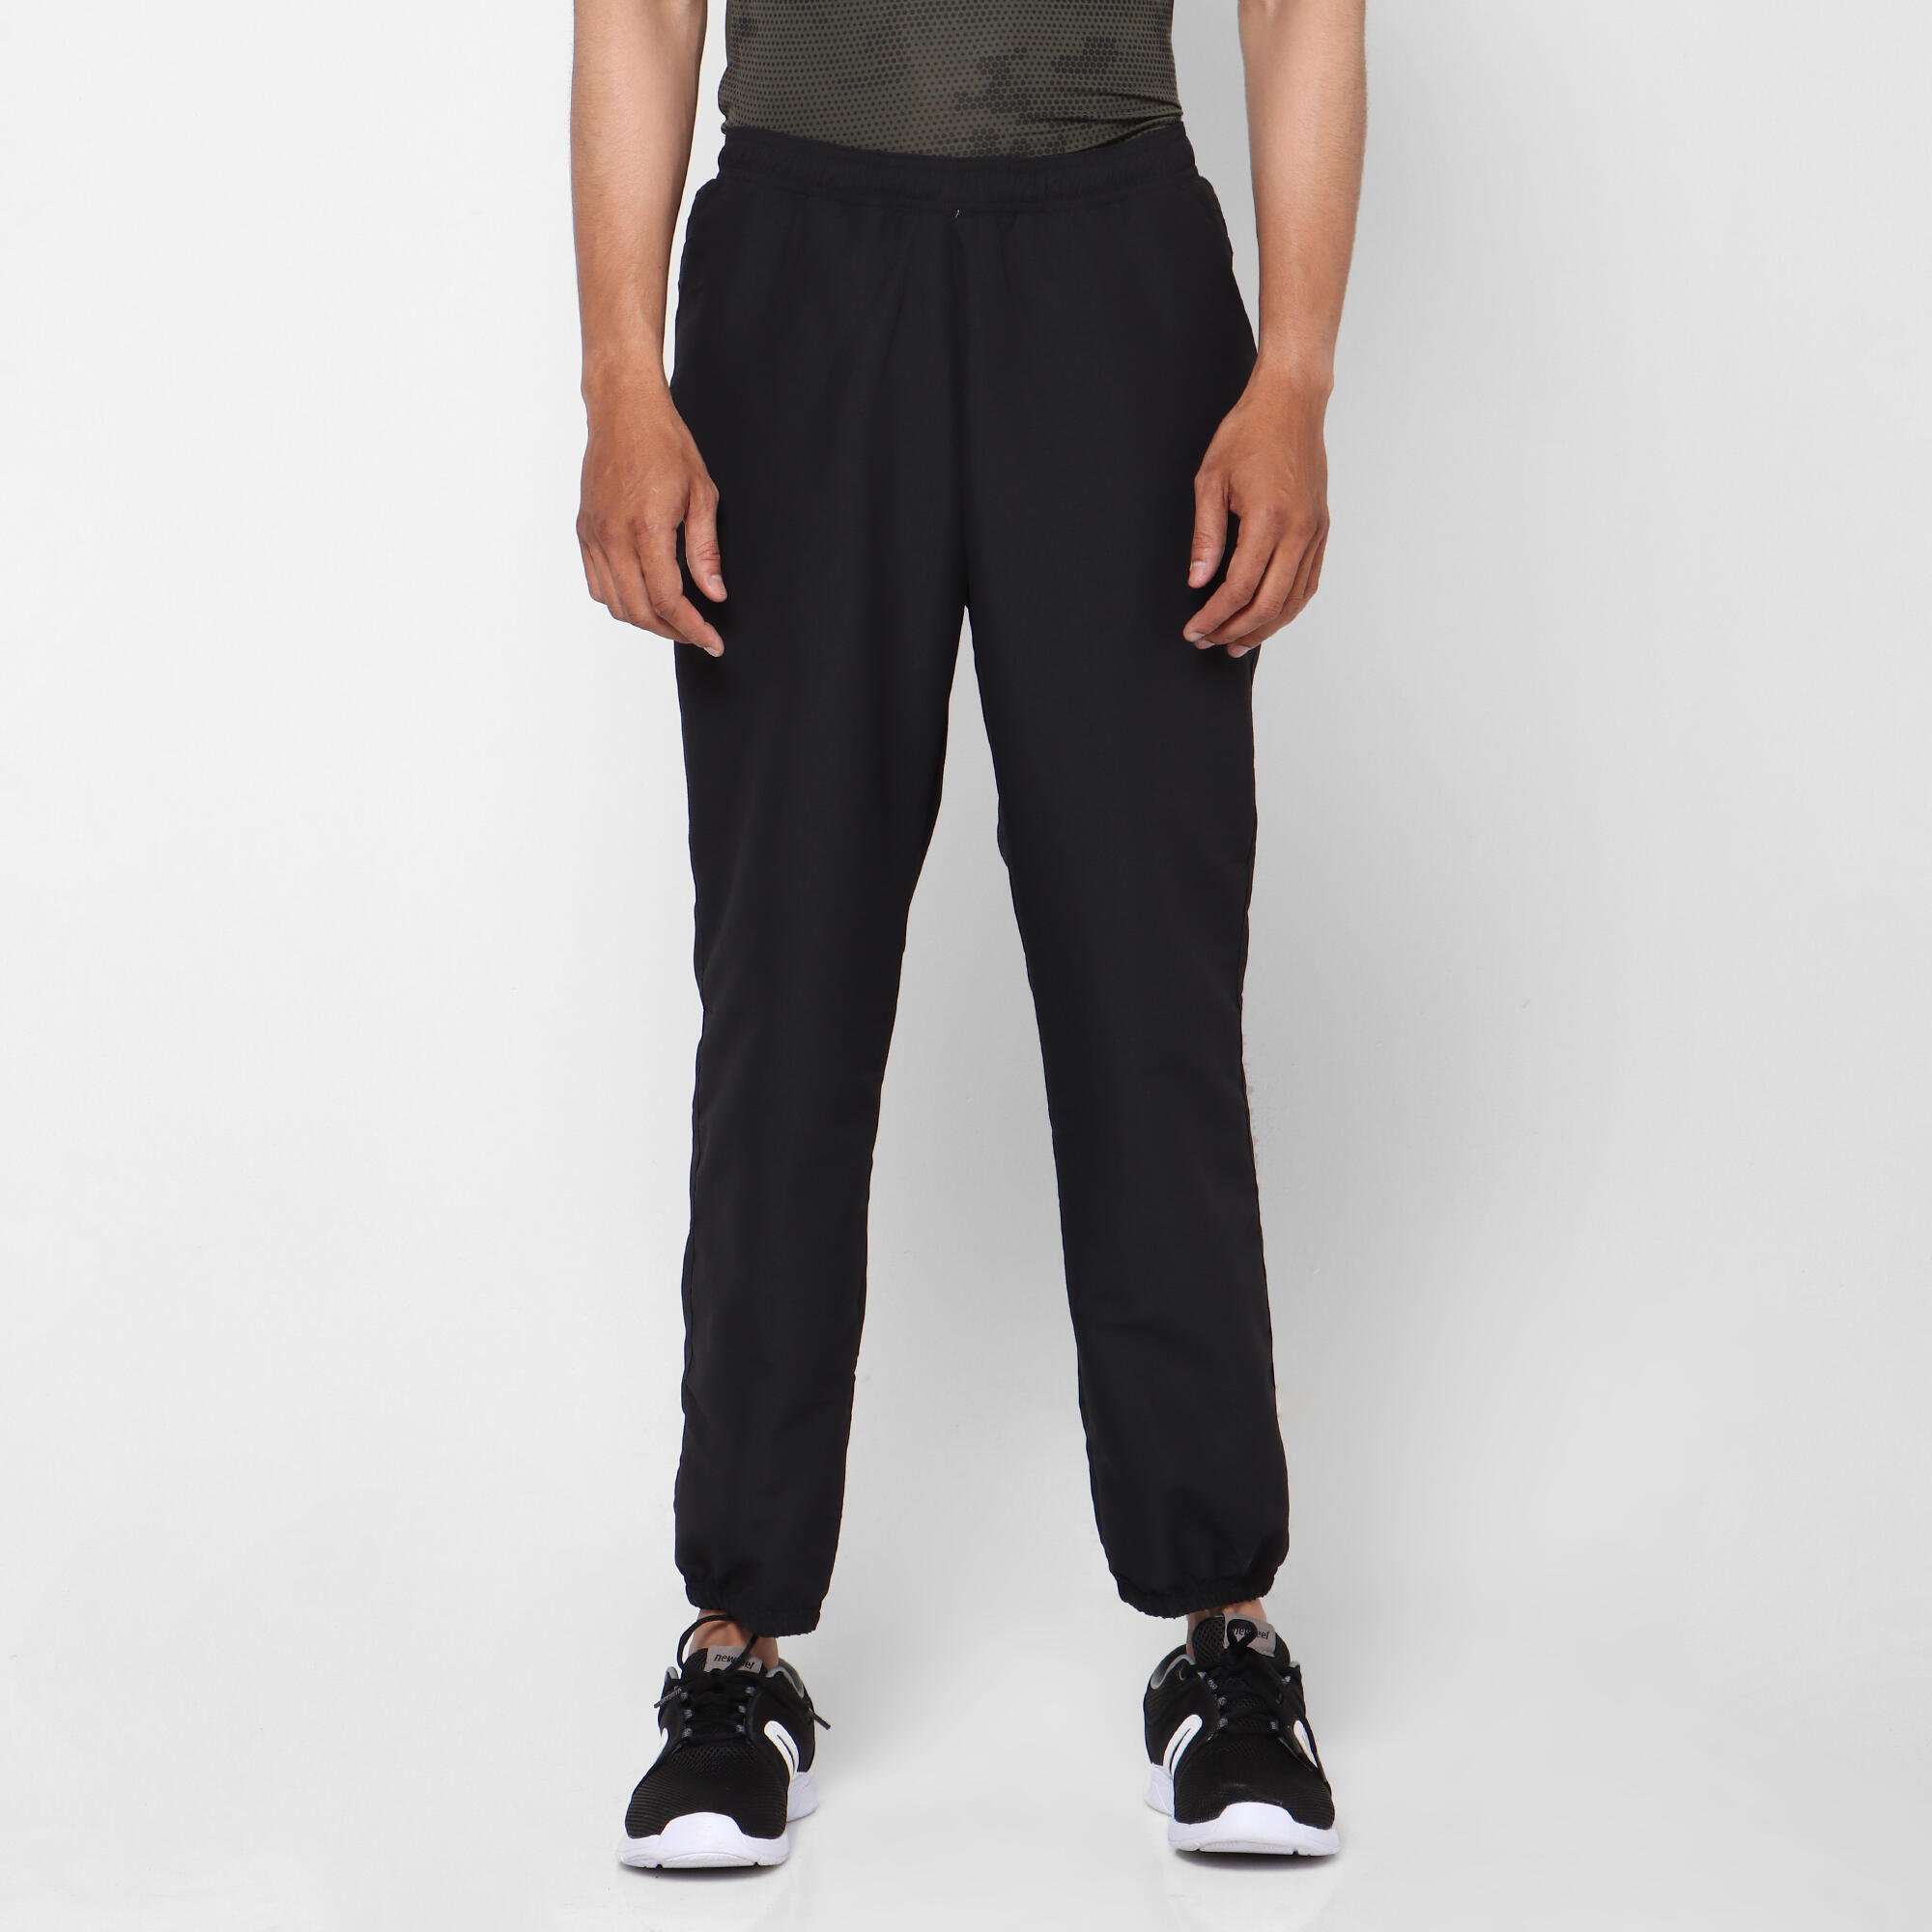 Nike x Drake Nocta Pants black for men - Pants | Holypopstore - Retail  innovators to fuel the culture of sneakers